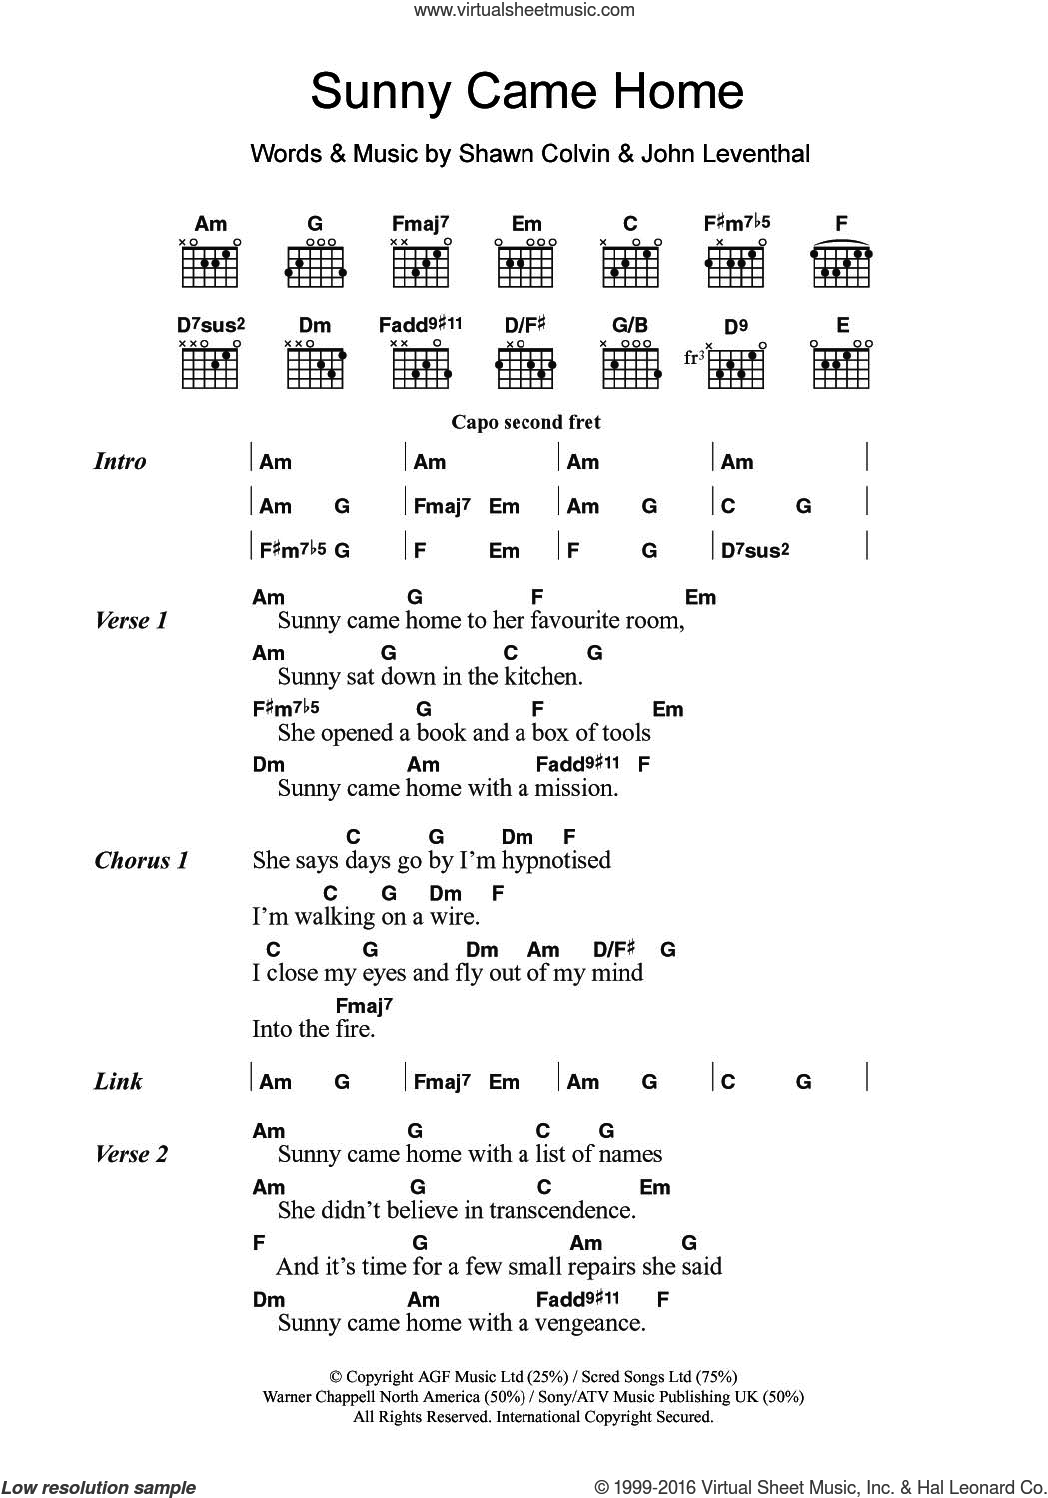 Shawn Colvin: Sunny Came Home sheet music for guitar (chords)